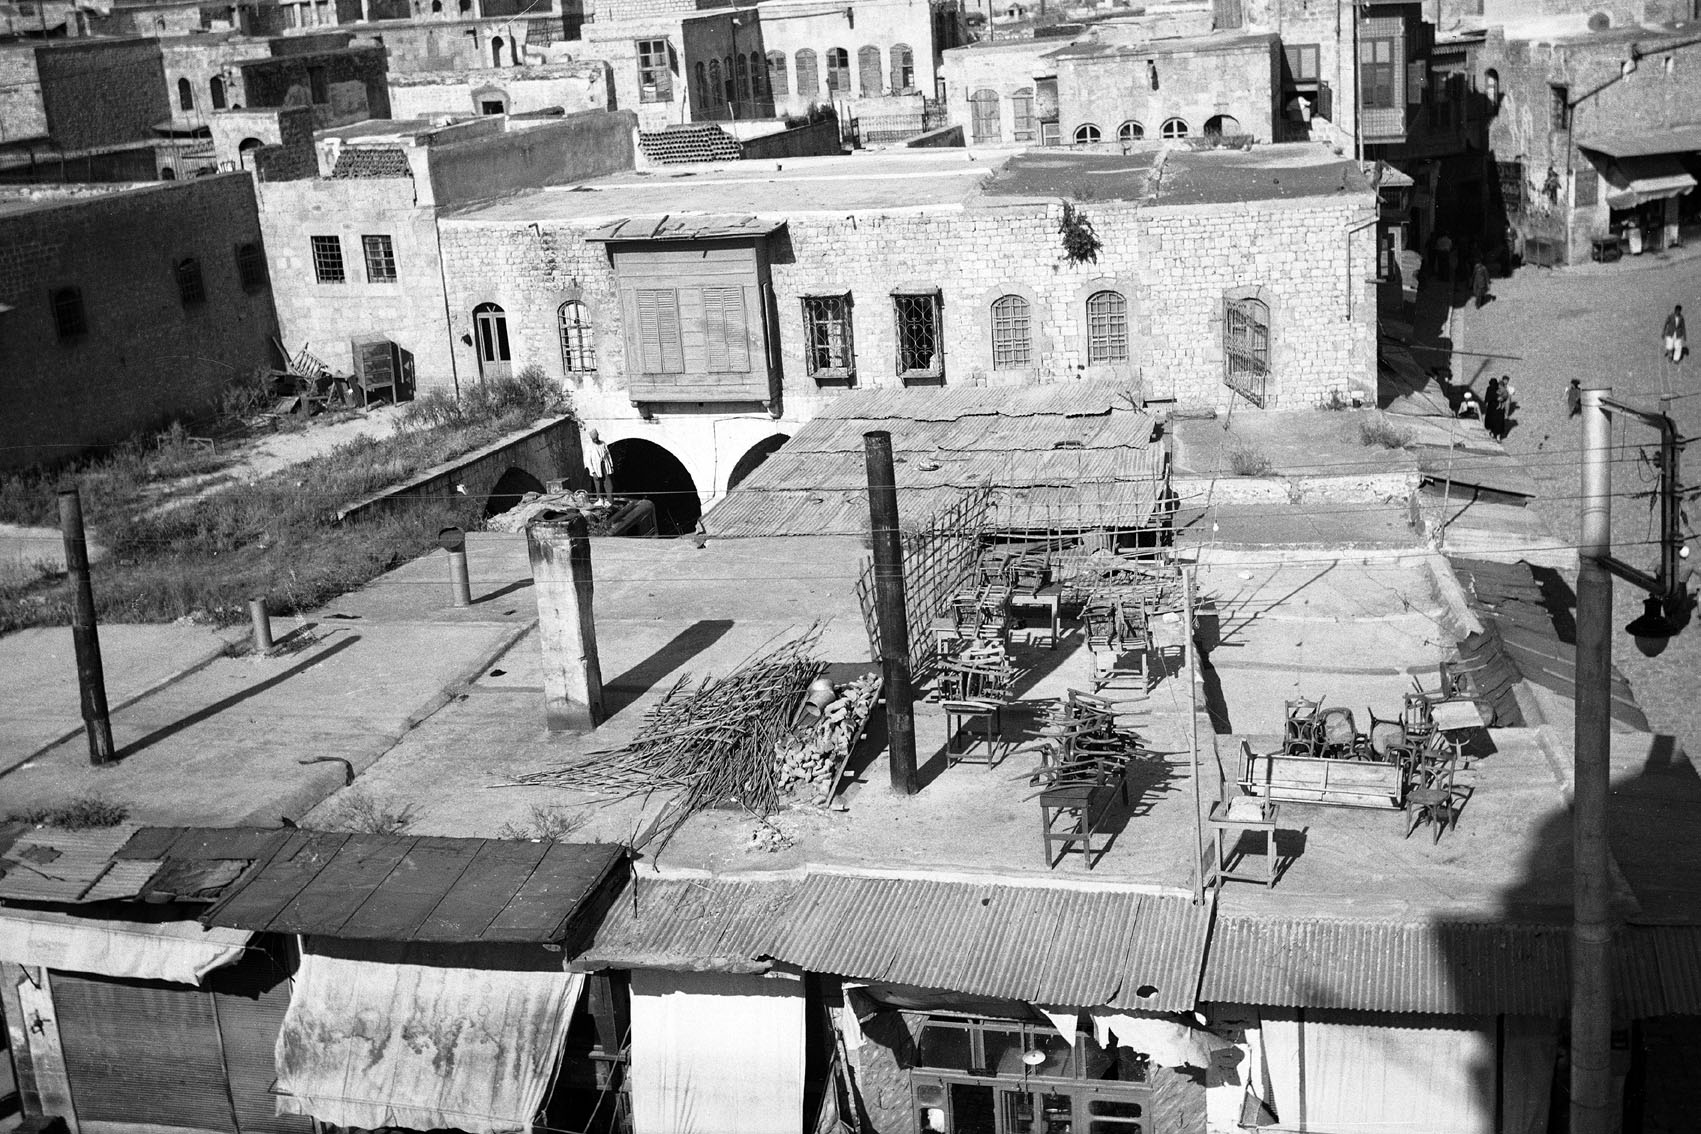 Section of public square known as Bab al-Faraj seen in 1937, part of the surrounding fabric of the gate demolished in 1904. Rooftops